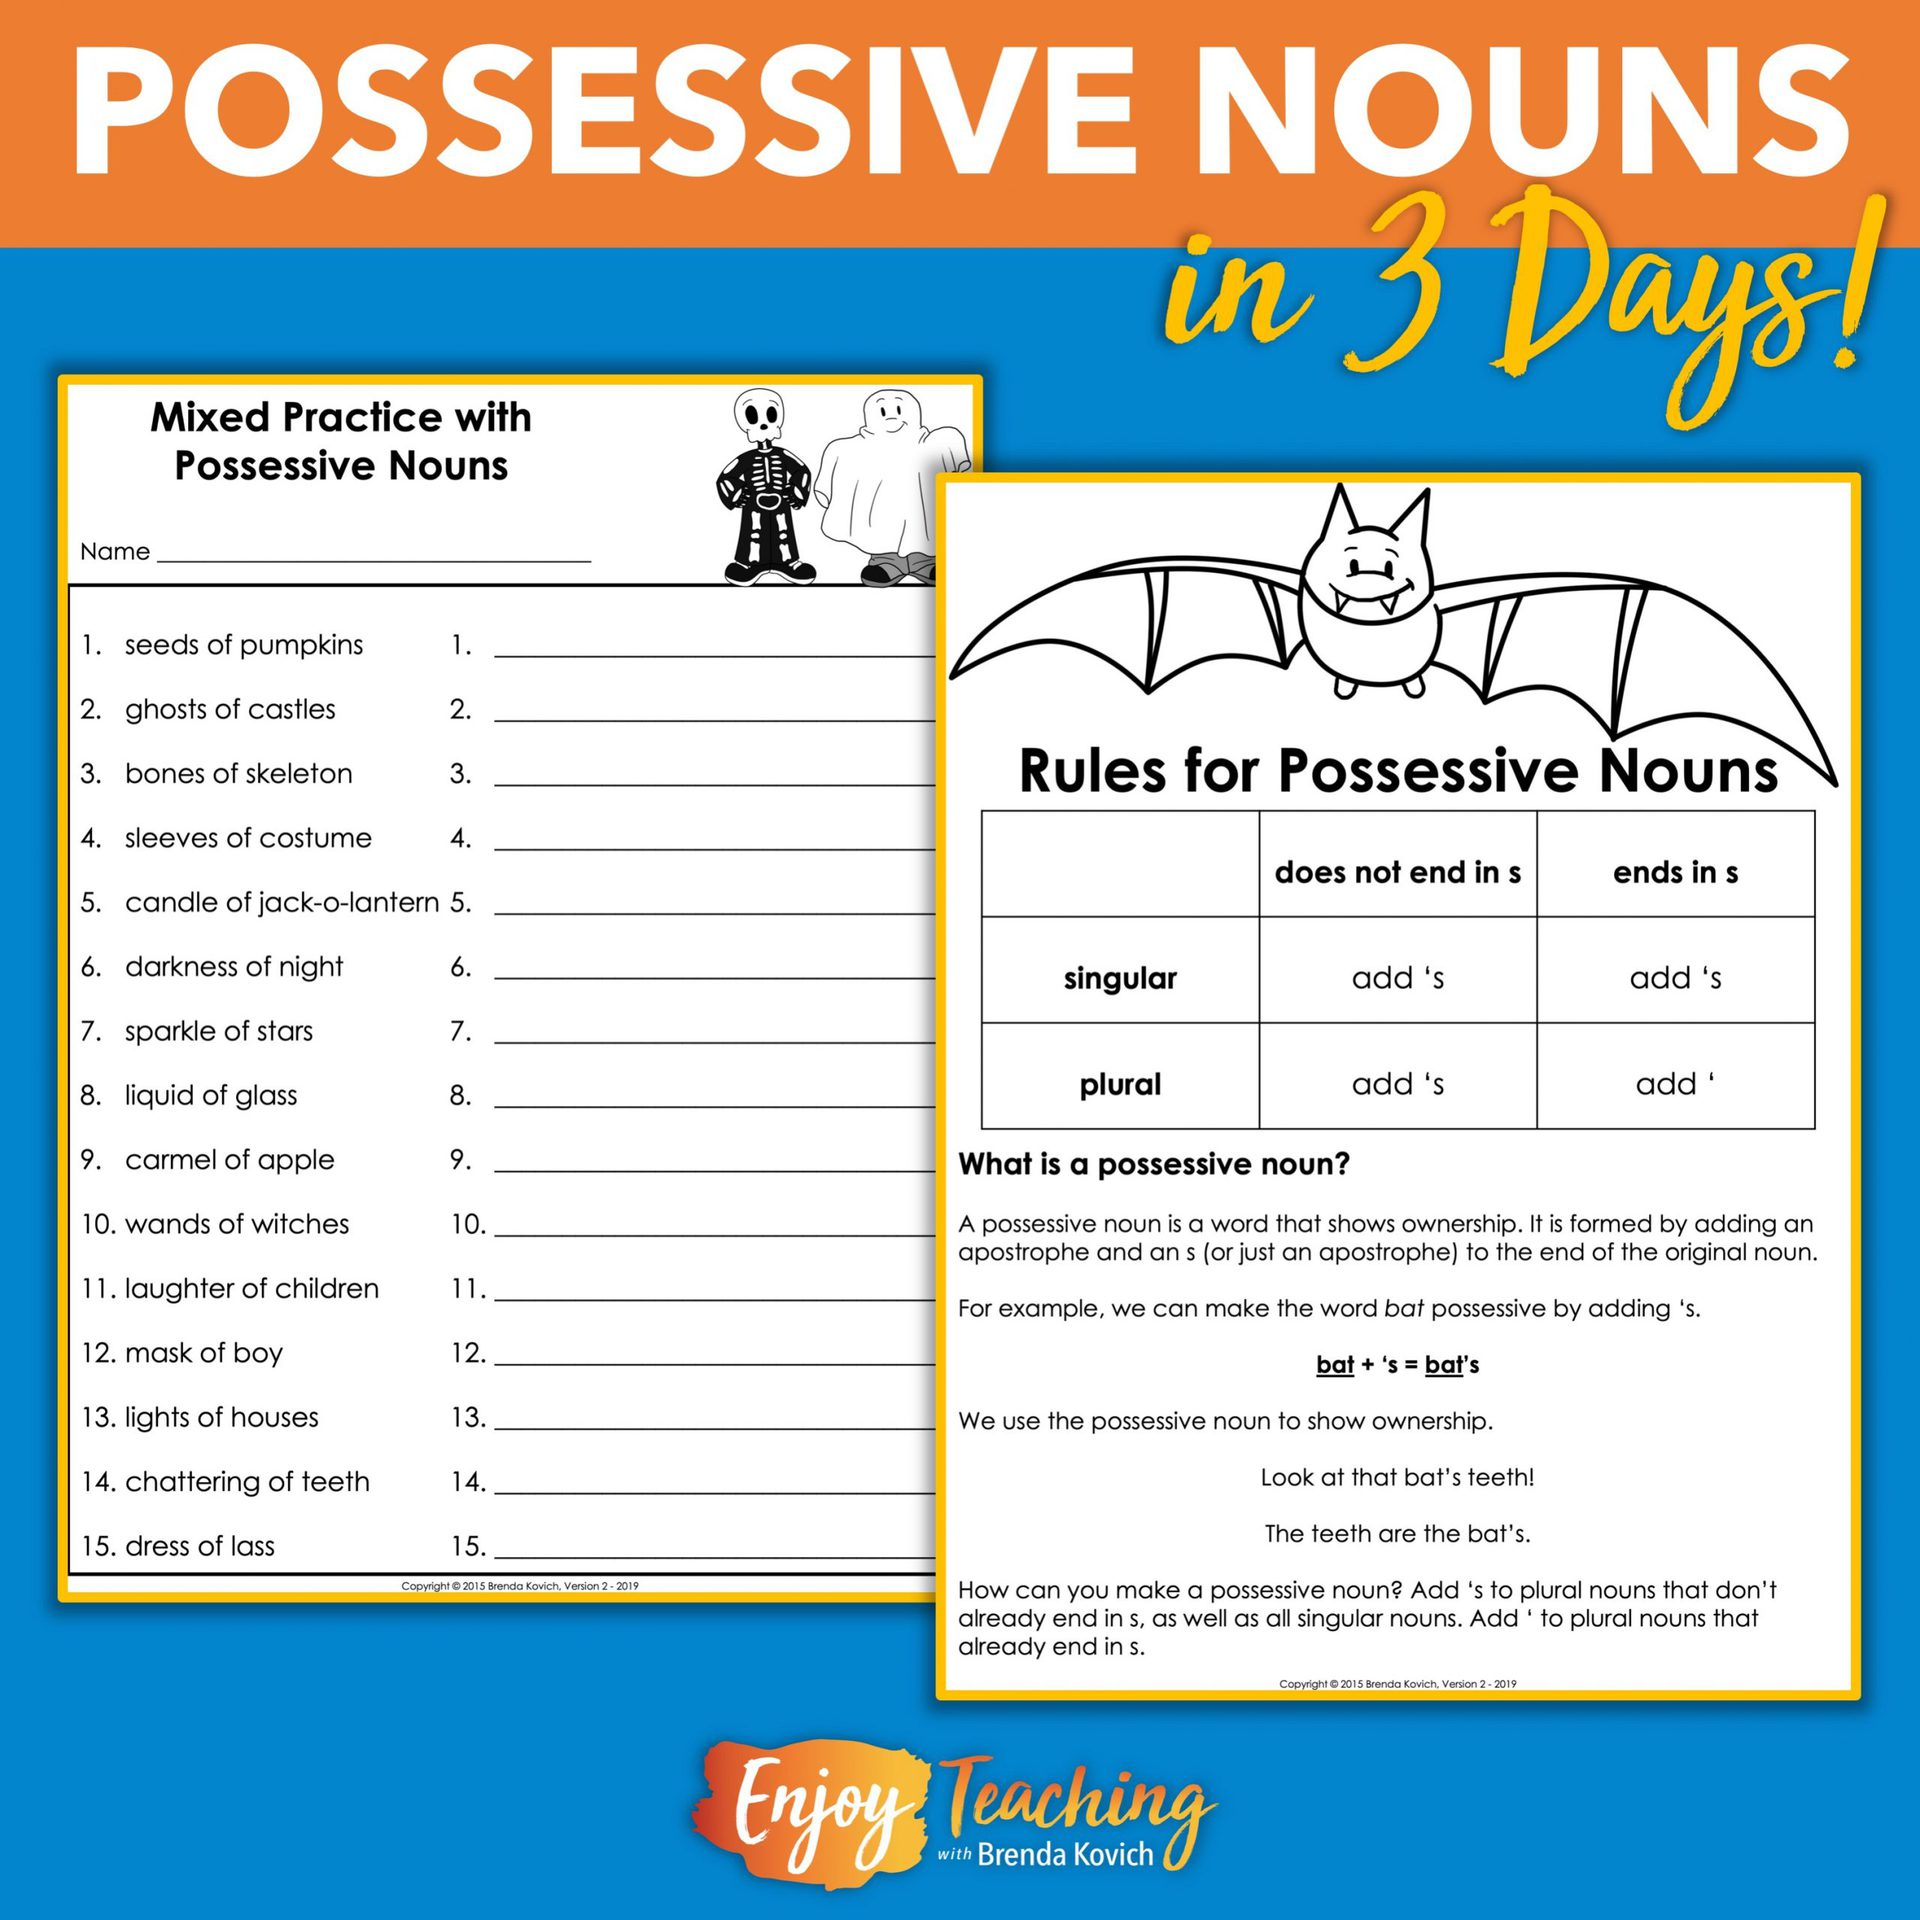 Teaching Possessive Nouns In Three Days Is Easy